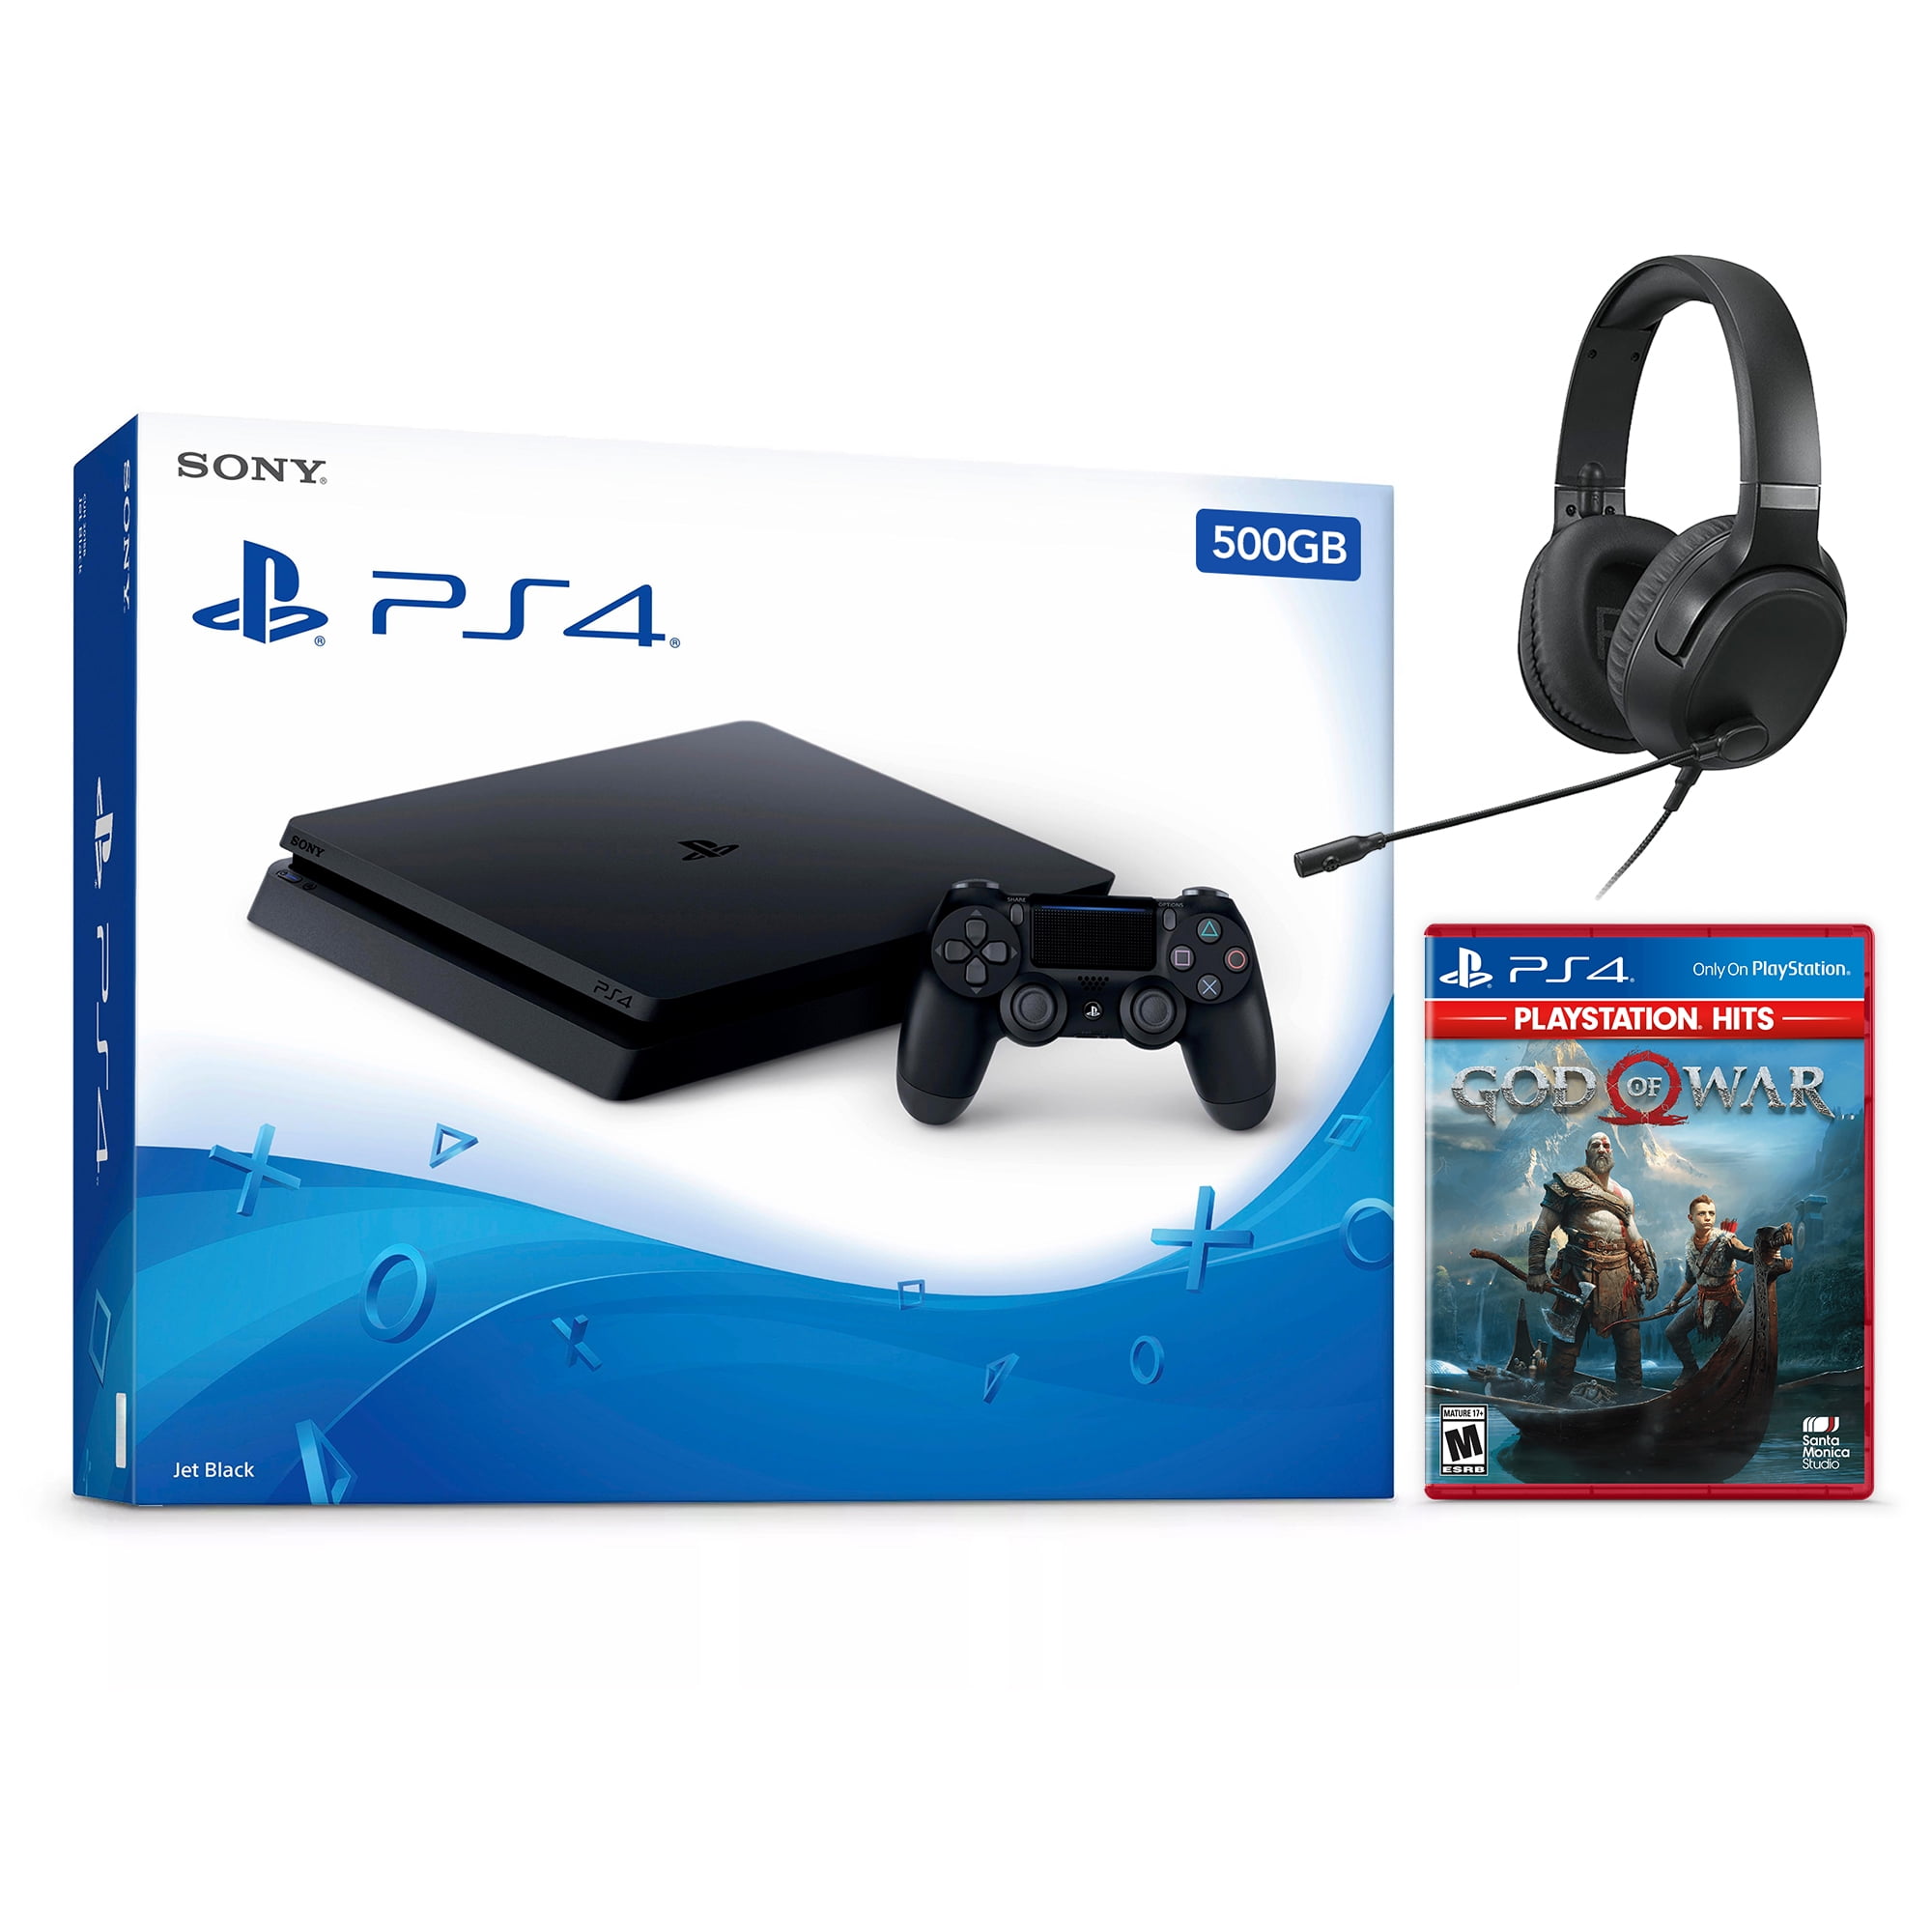 Sony PlayStation 4 JP Free Version God with PS4 of Headset Slim Console, War Chat Gaming Bundle Mytrix Hits Region - PlayStation 500GB